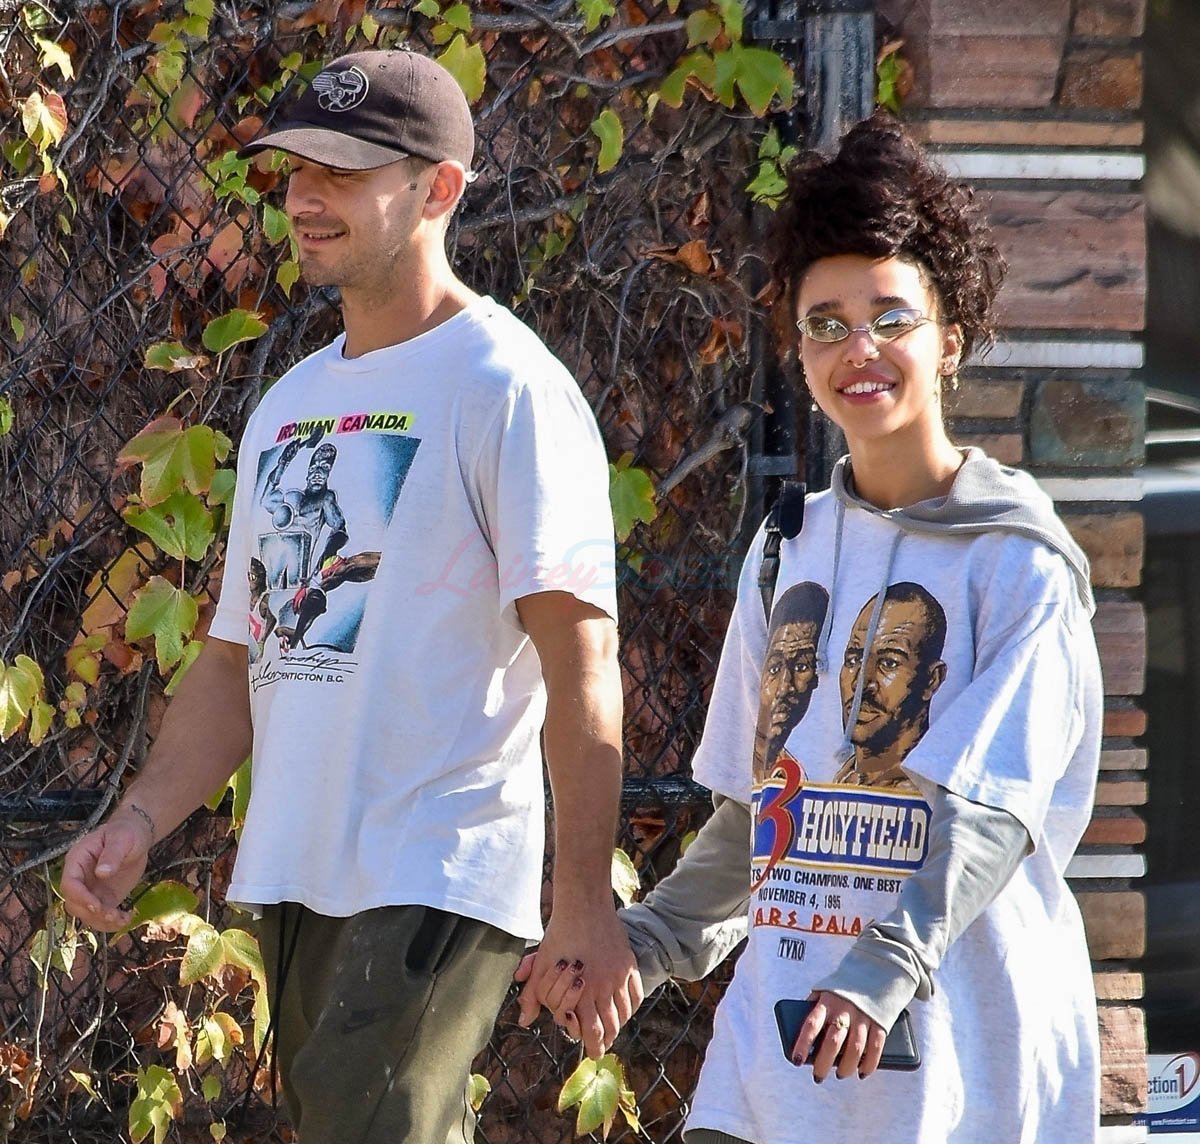 Shia LaBeouf and FKA twigs kissing in public in matching outfits1200 x 1144